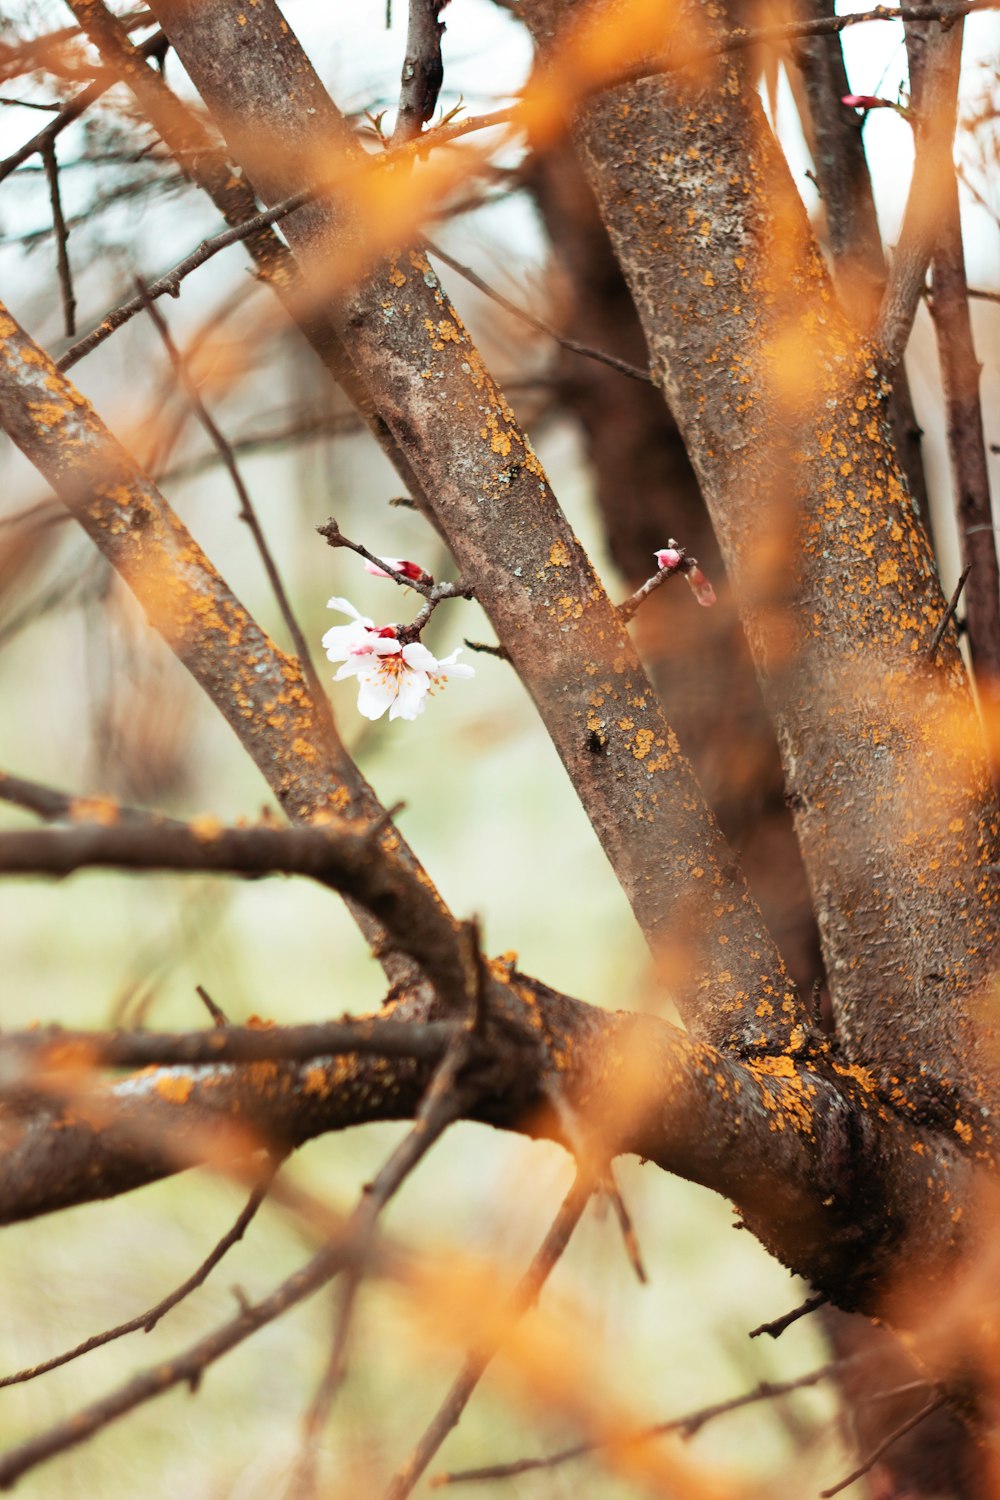 red and white flower buds on brown tree branch